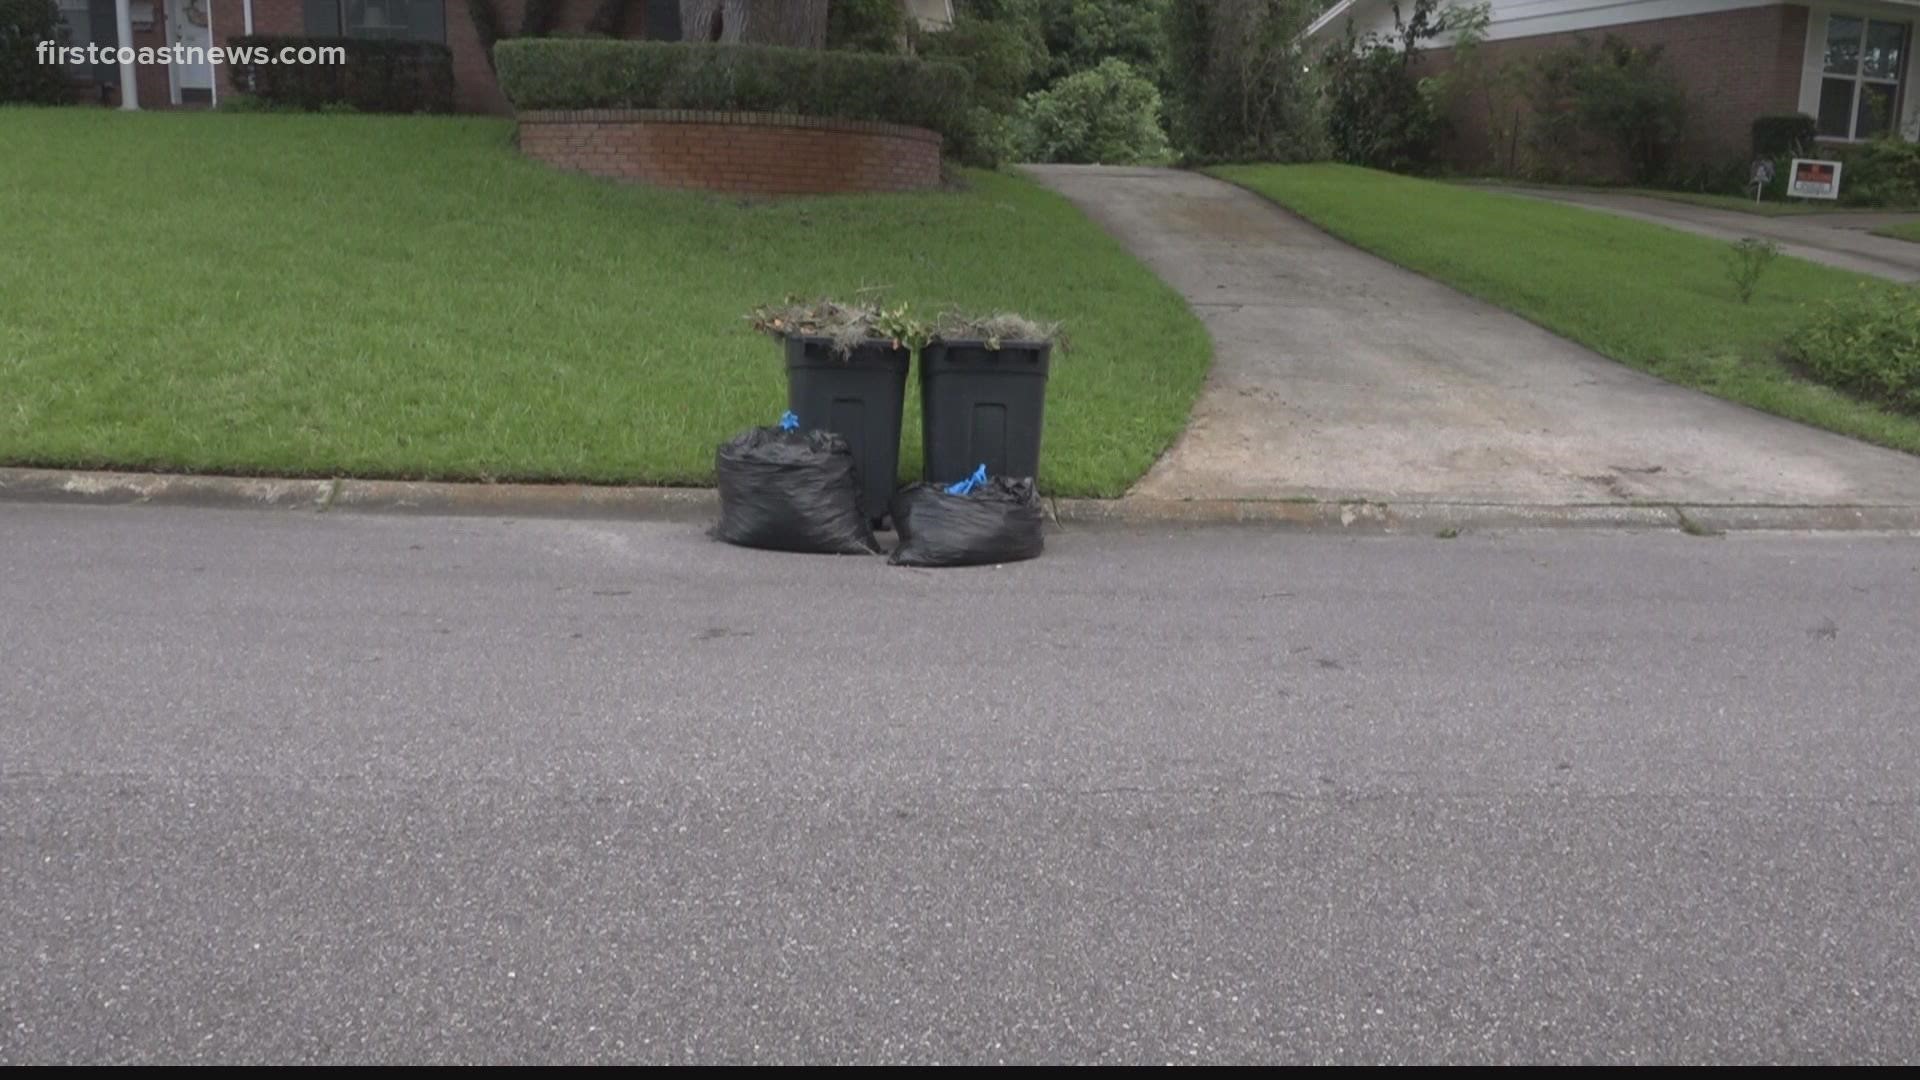 Peter Jansson lives in Hyde grove acres and says the trash has been sitting for weeks.